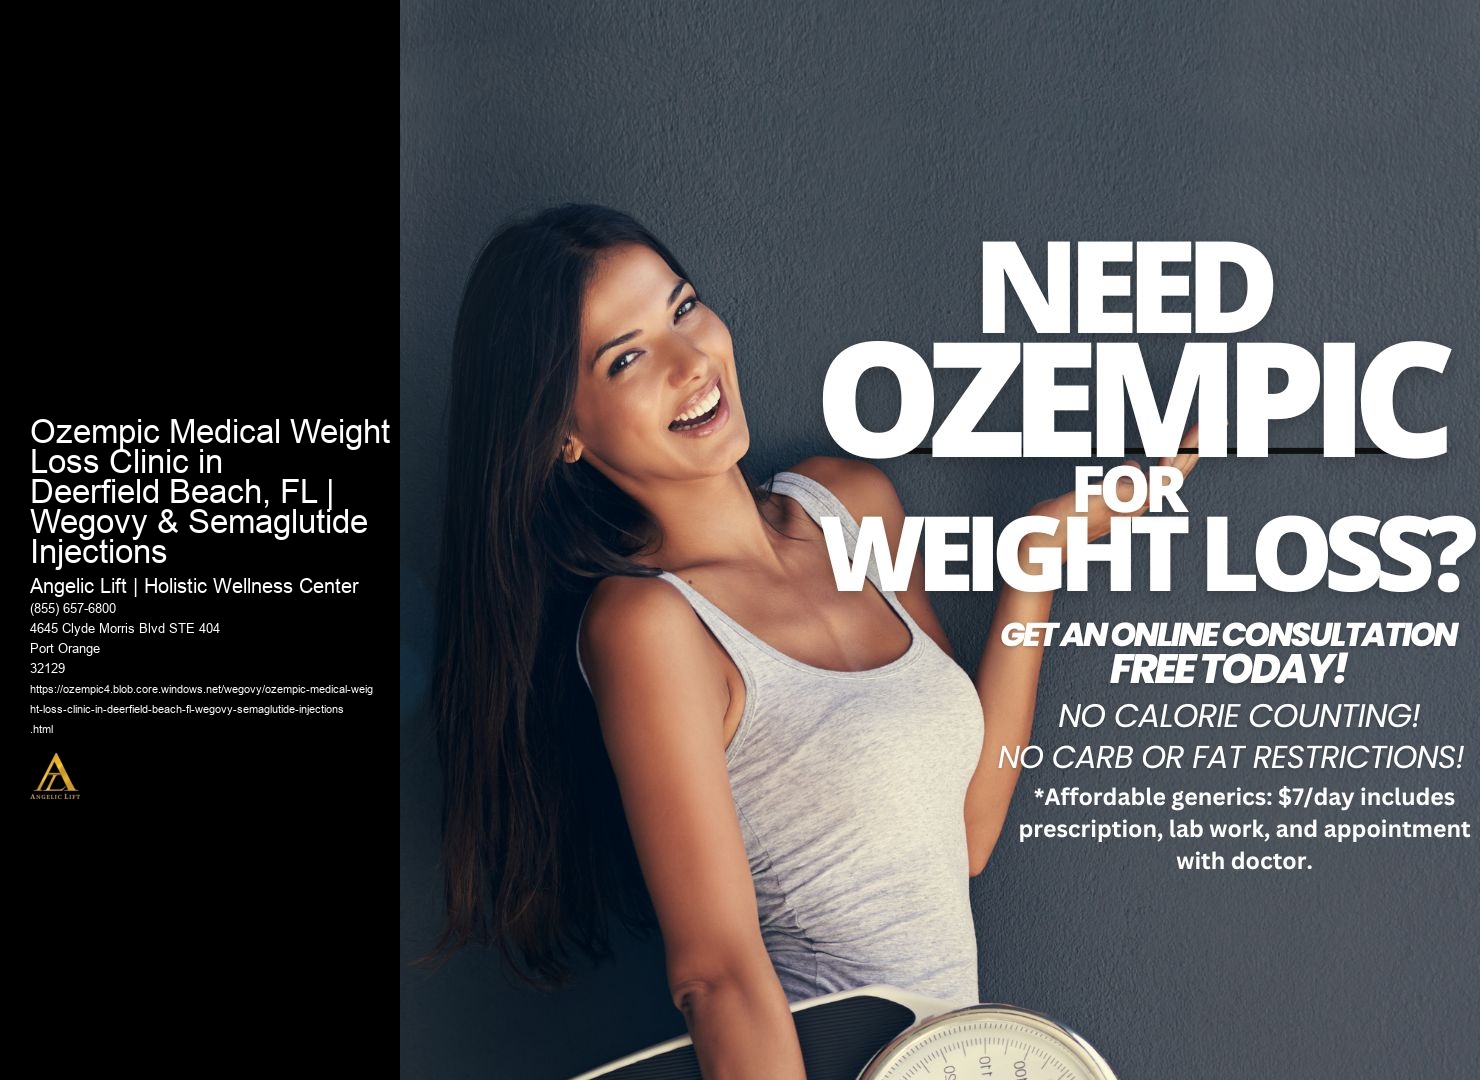 Ozempic Medical Weight Loss Clinic in Deerfield Beach, FL | Wegovy & Semaglutide Injections